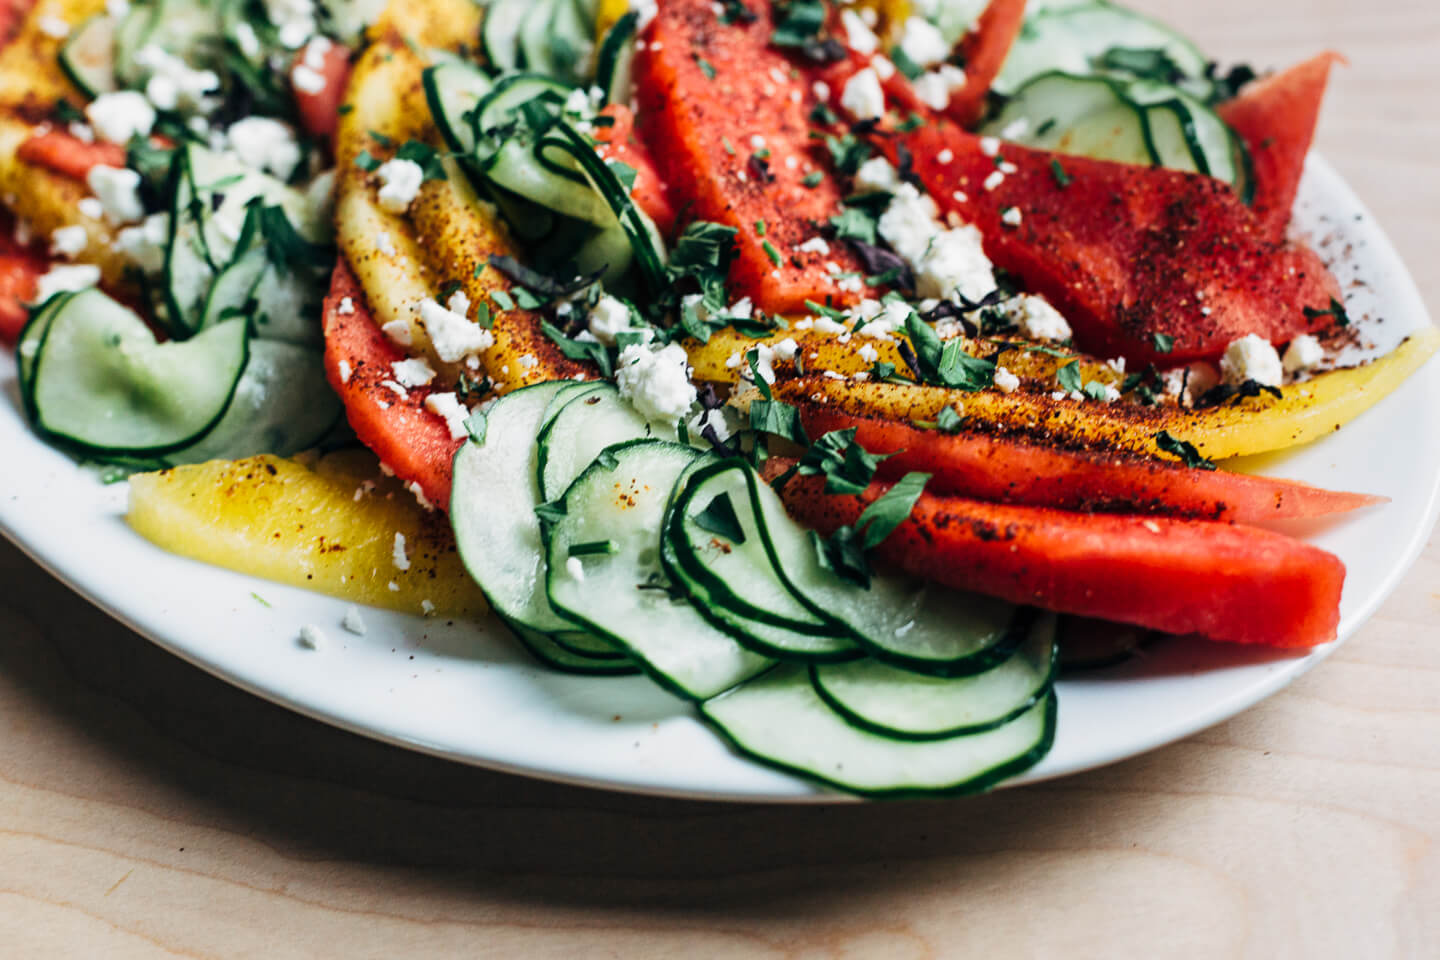 A refreshing cucumber-watermelon salad that pairs spicy-sweet watermelon wedges with lime-infused cucumbers. Spicy and cooling, this effortless summer salad is a knockout. 